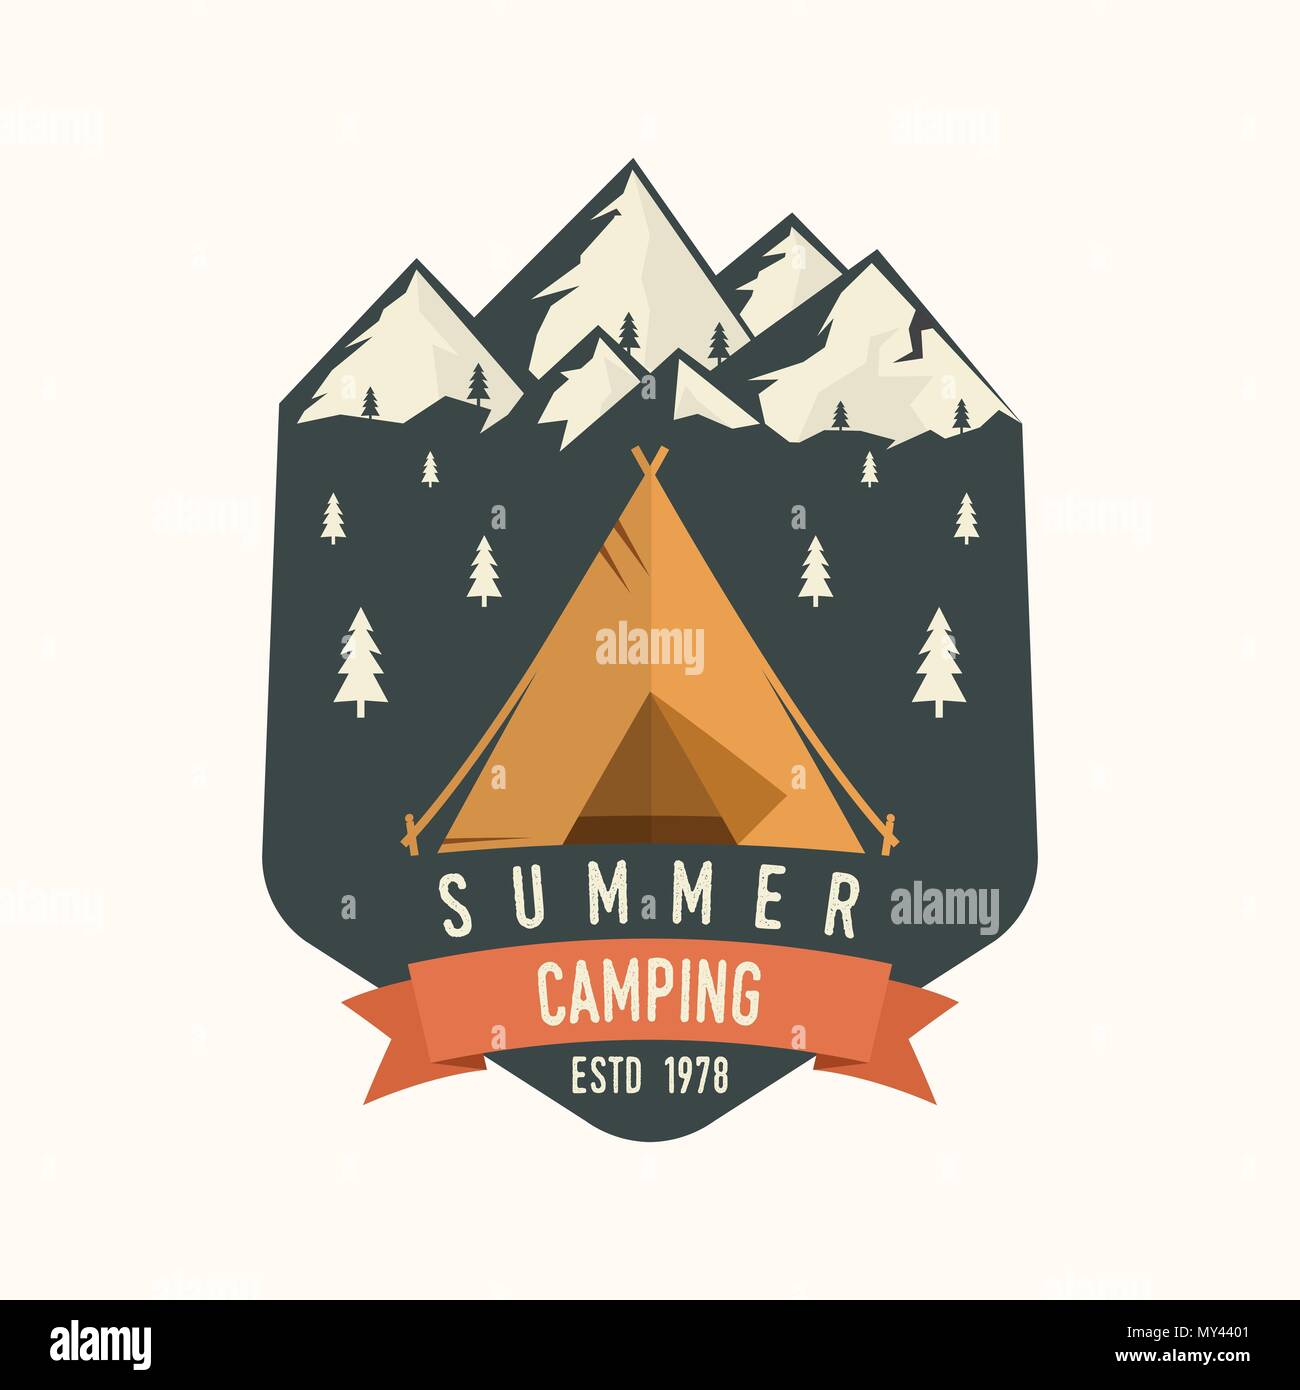 Camping club. Vector illustration. Concept for shirt or logo, print, stamp or tee. Vintage typography design with Camper tent, mountains and forest silhouette. Stock Vector